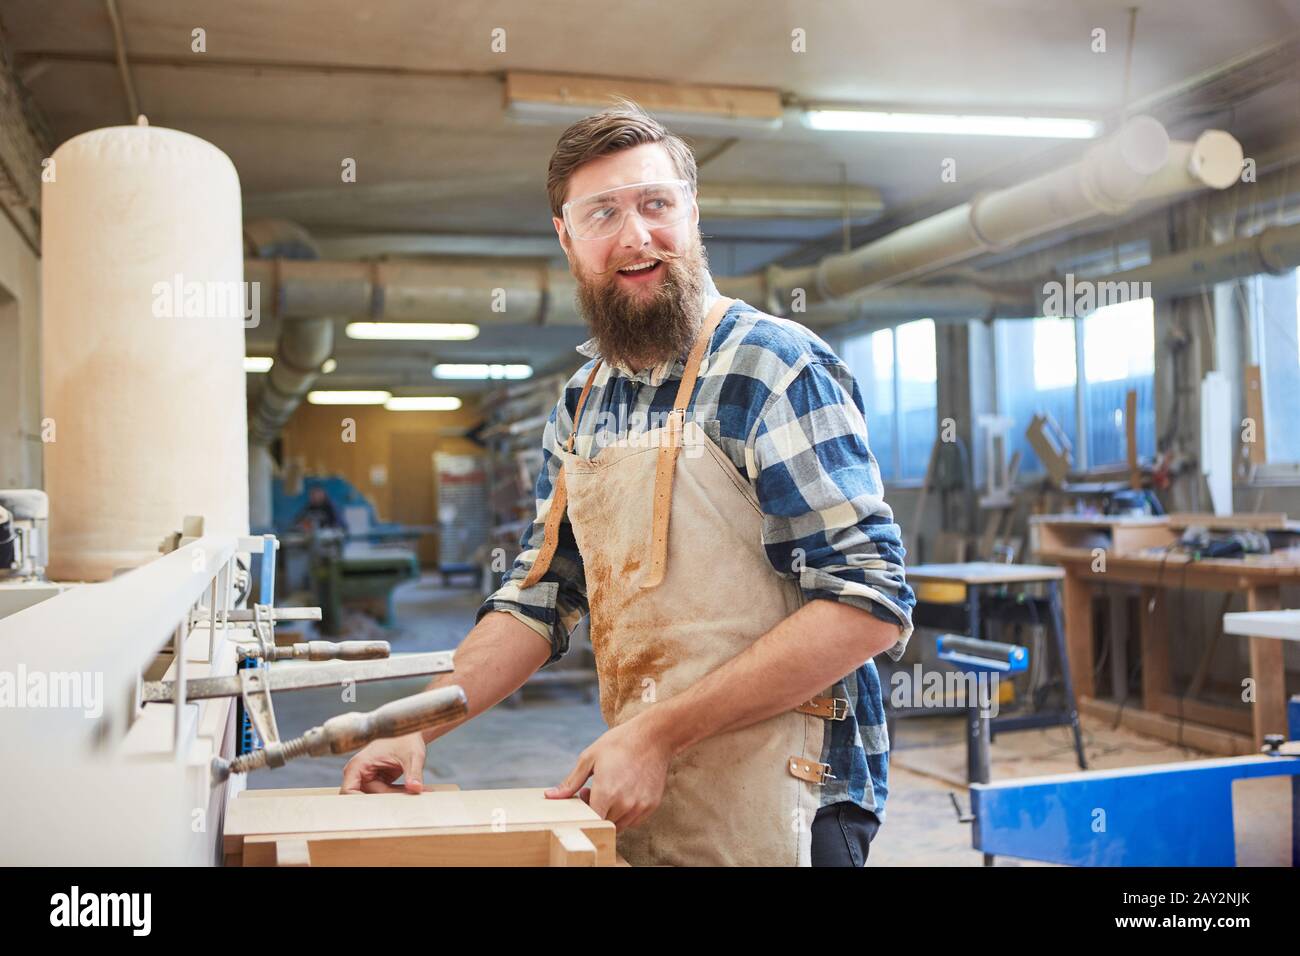 Carpenter apprentice works as a furniture maker with wood on the grinding machine Stock Photo